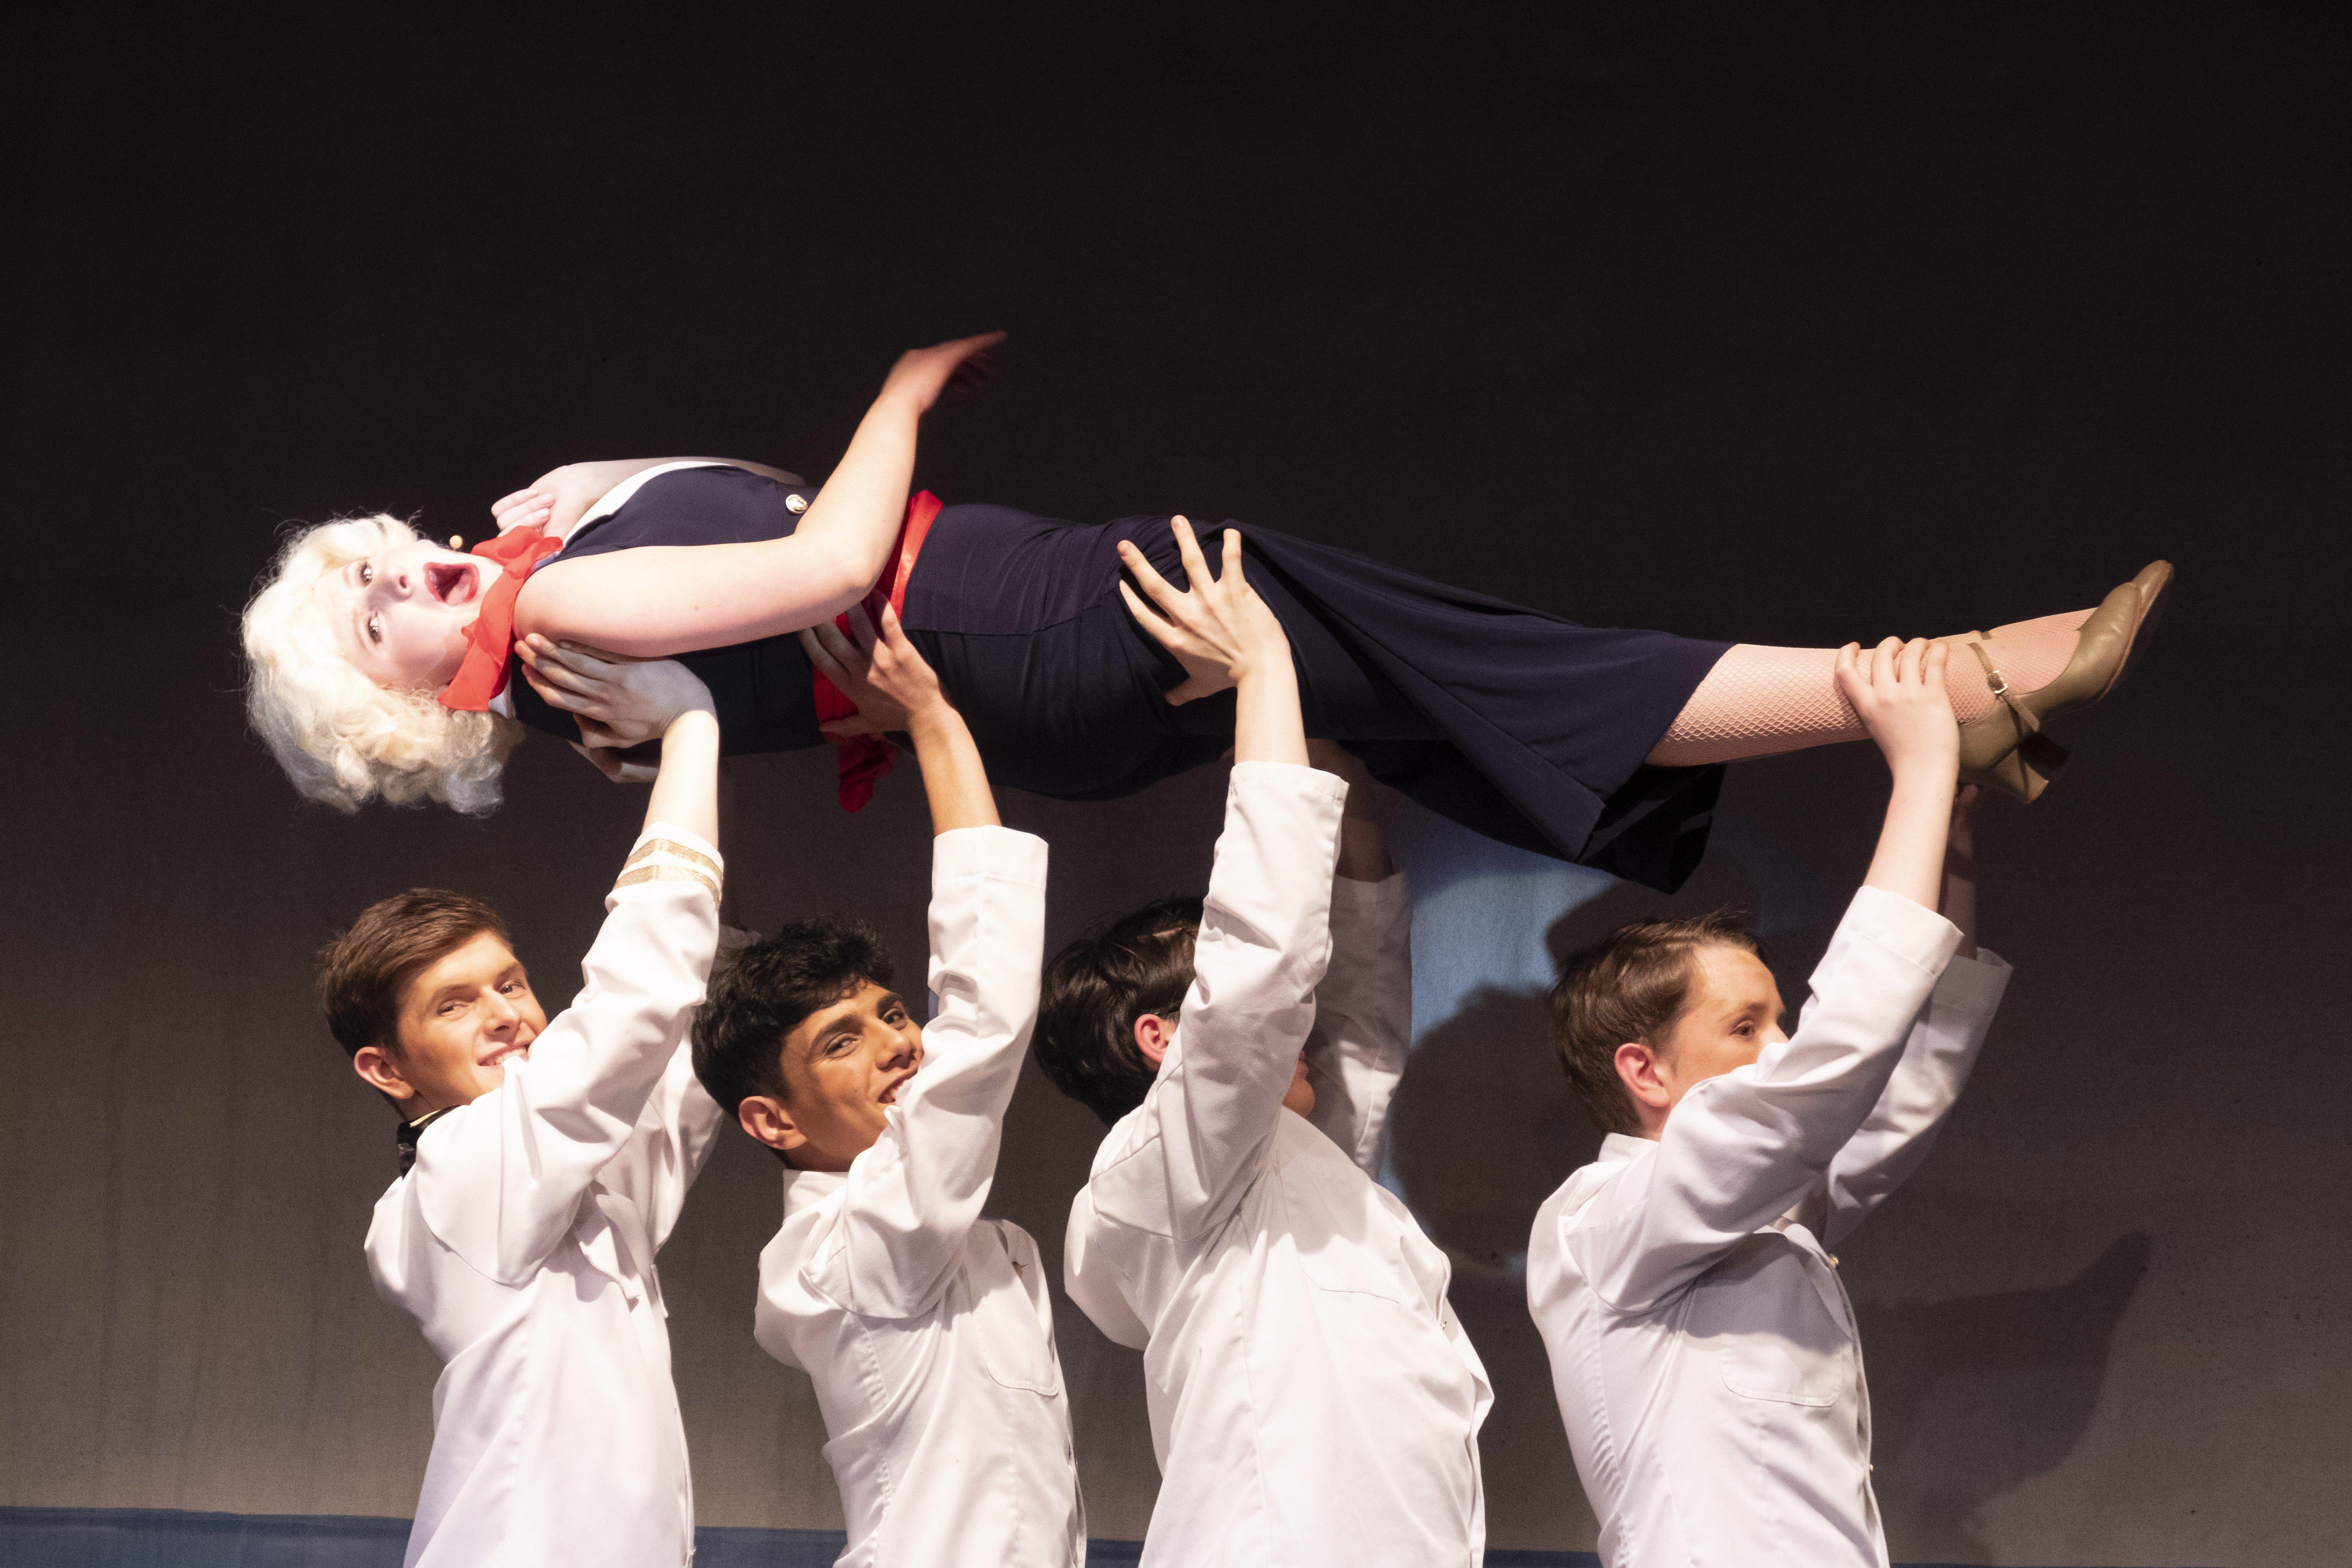 Erma (Jess Thomson) is hoisted high by sailors.
Galashiels Amateur Operatic Society's production of Anything Goes appears this week at the Volunteer Hall, Galashiels. Tickets, £15/£12.